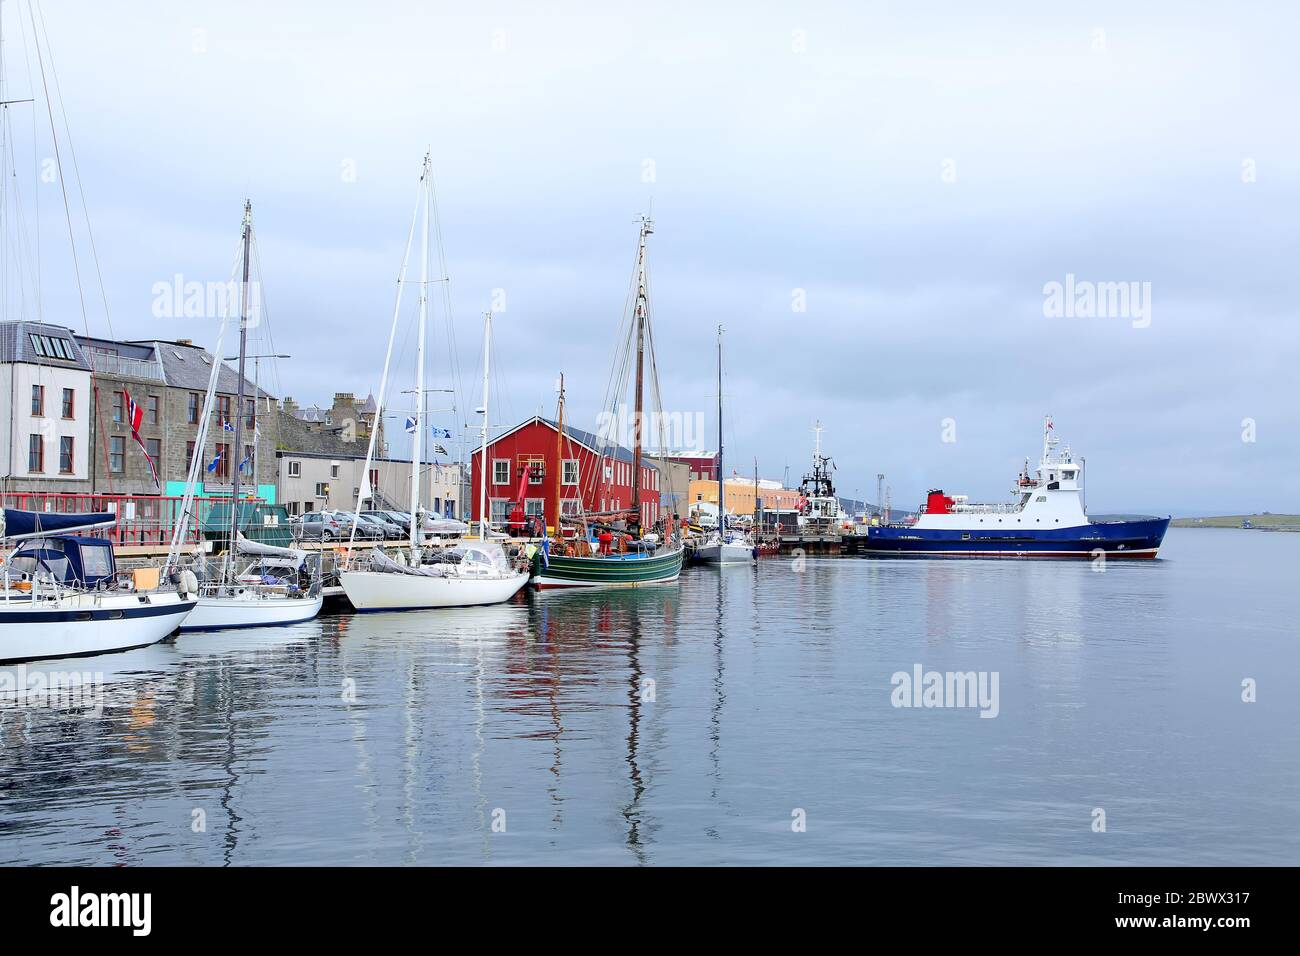 Harbour with fishing boats, lifeboat & buildings in the background, Lerwick, Shetland Islands, Scotland. Stock Photo